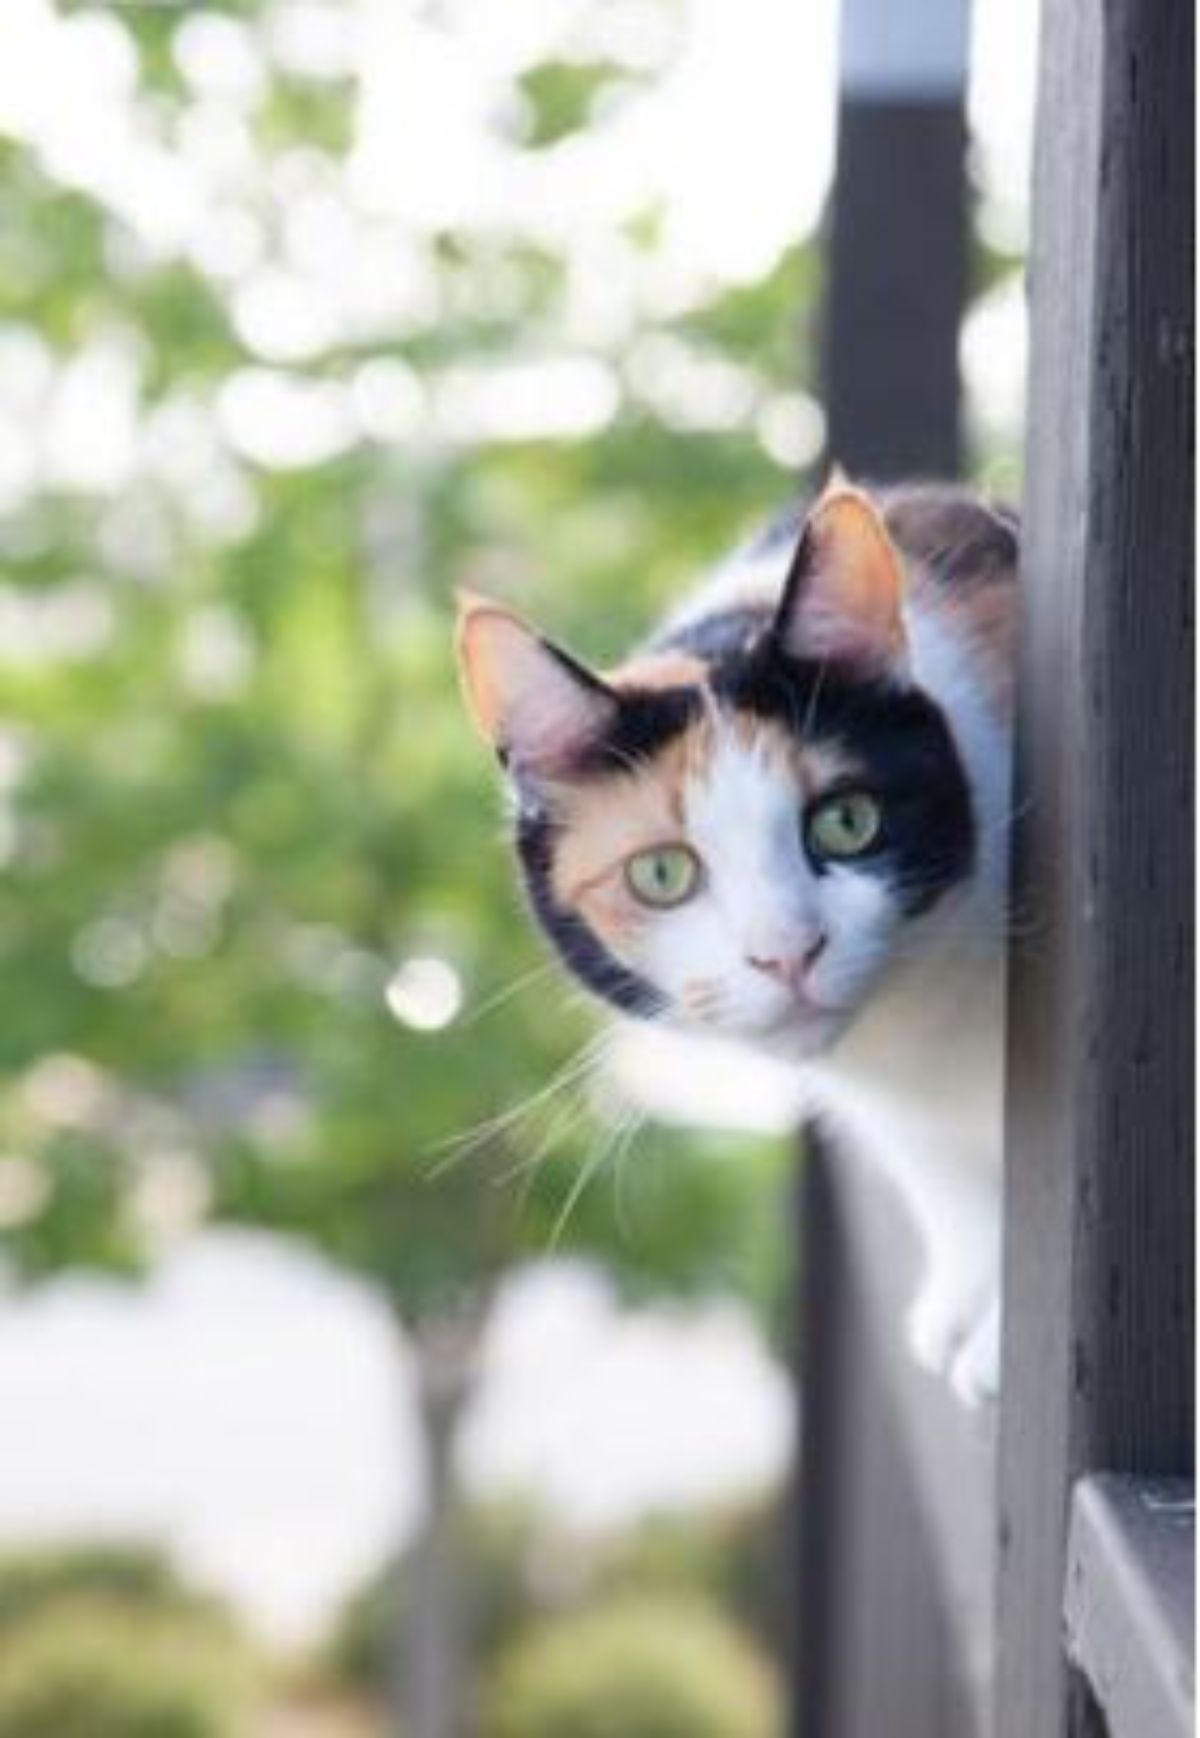 white black and orange cat leaning out of a window and peeking out